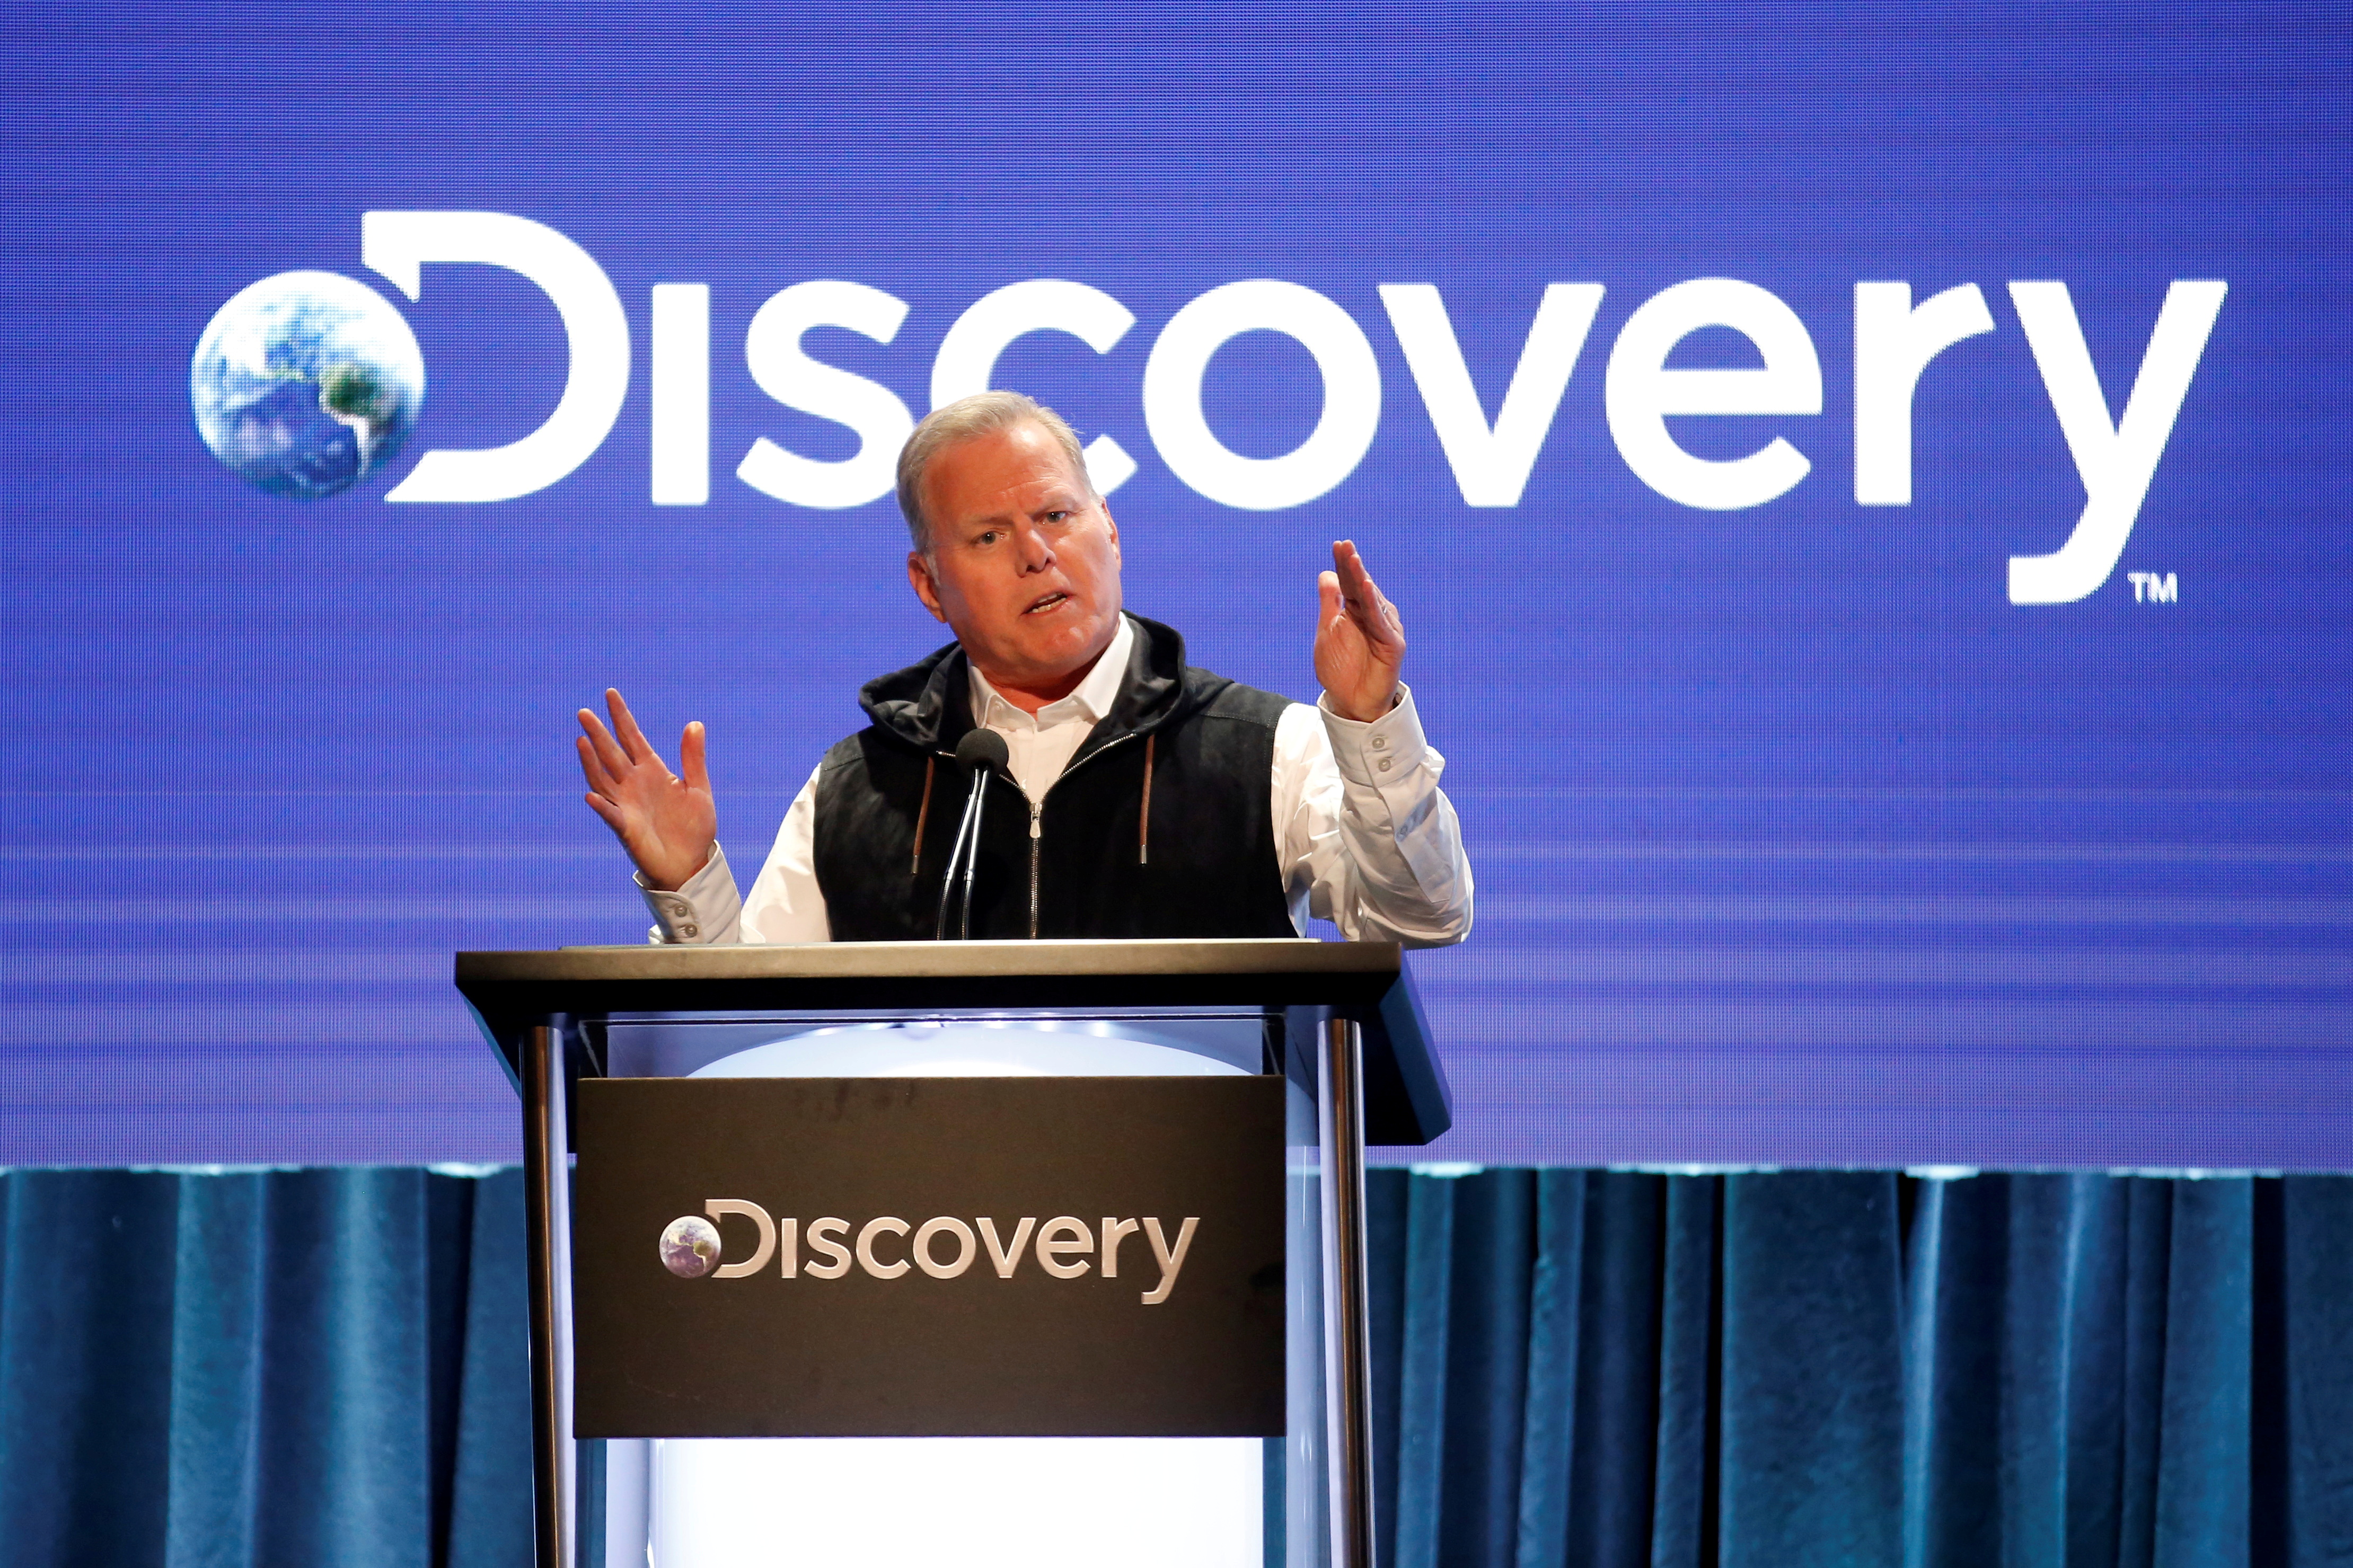 President and CEO of Discovery David Zaslav speaks during the Discovery portion of the Television Critics Association (TCA) Summer Press Tour in Beverly Hills